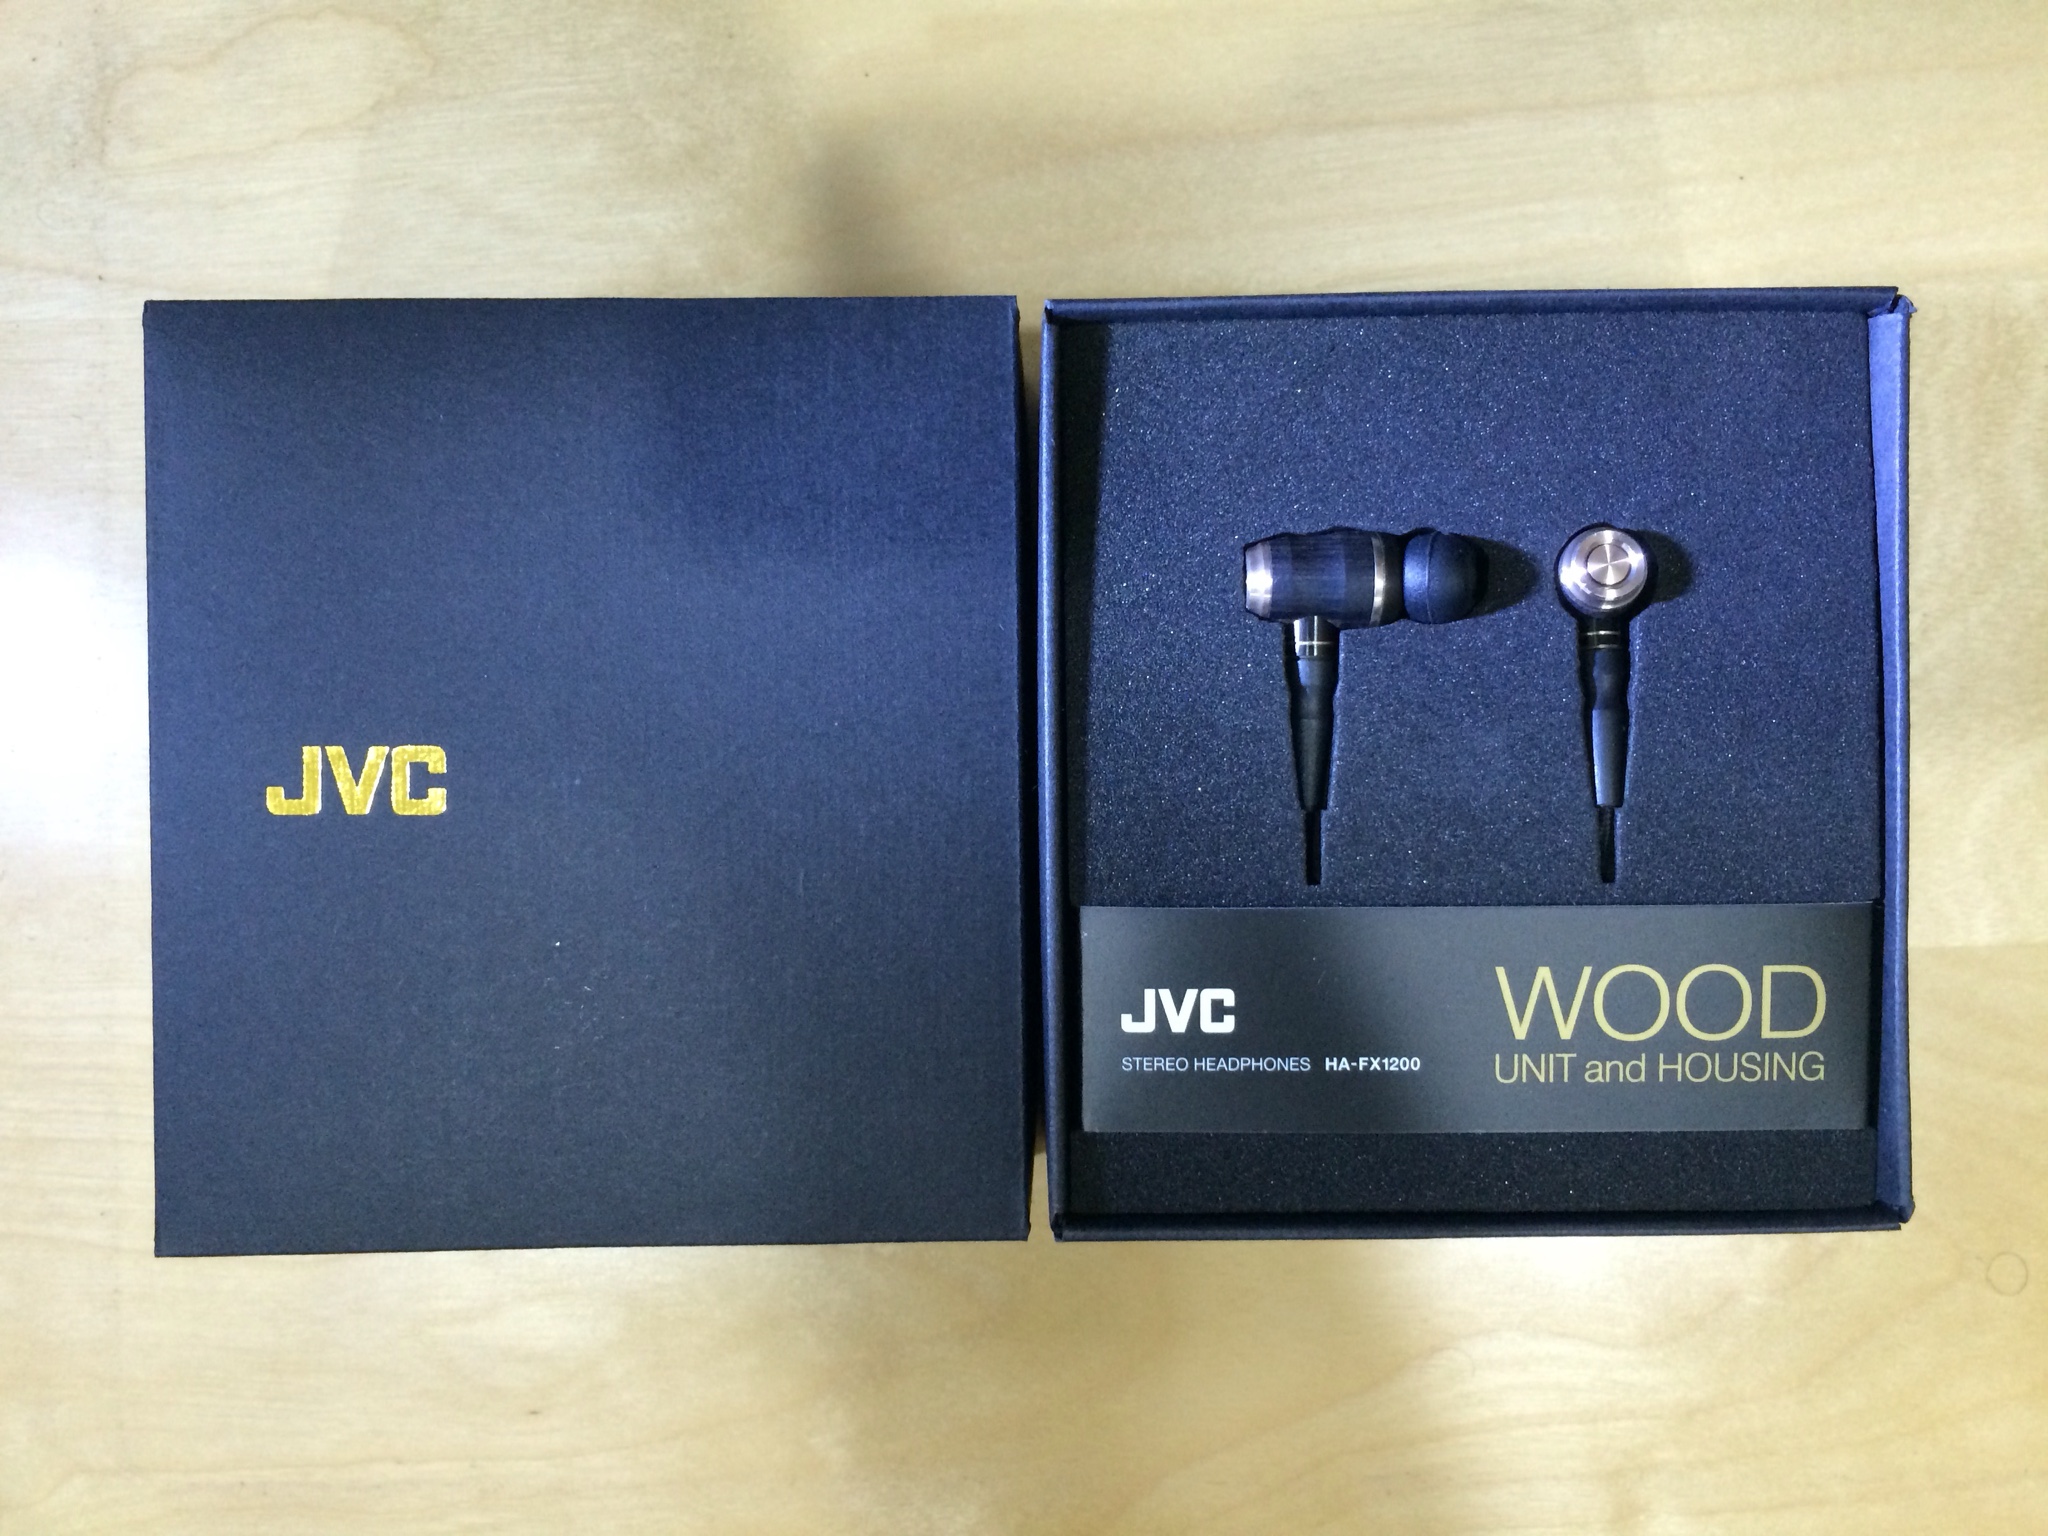 JVC's HA-FX1200 comes in an excellent and attractive packaging